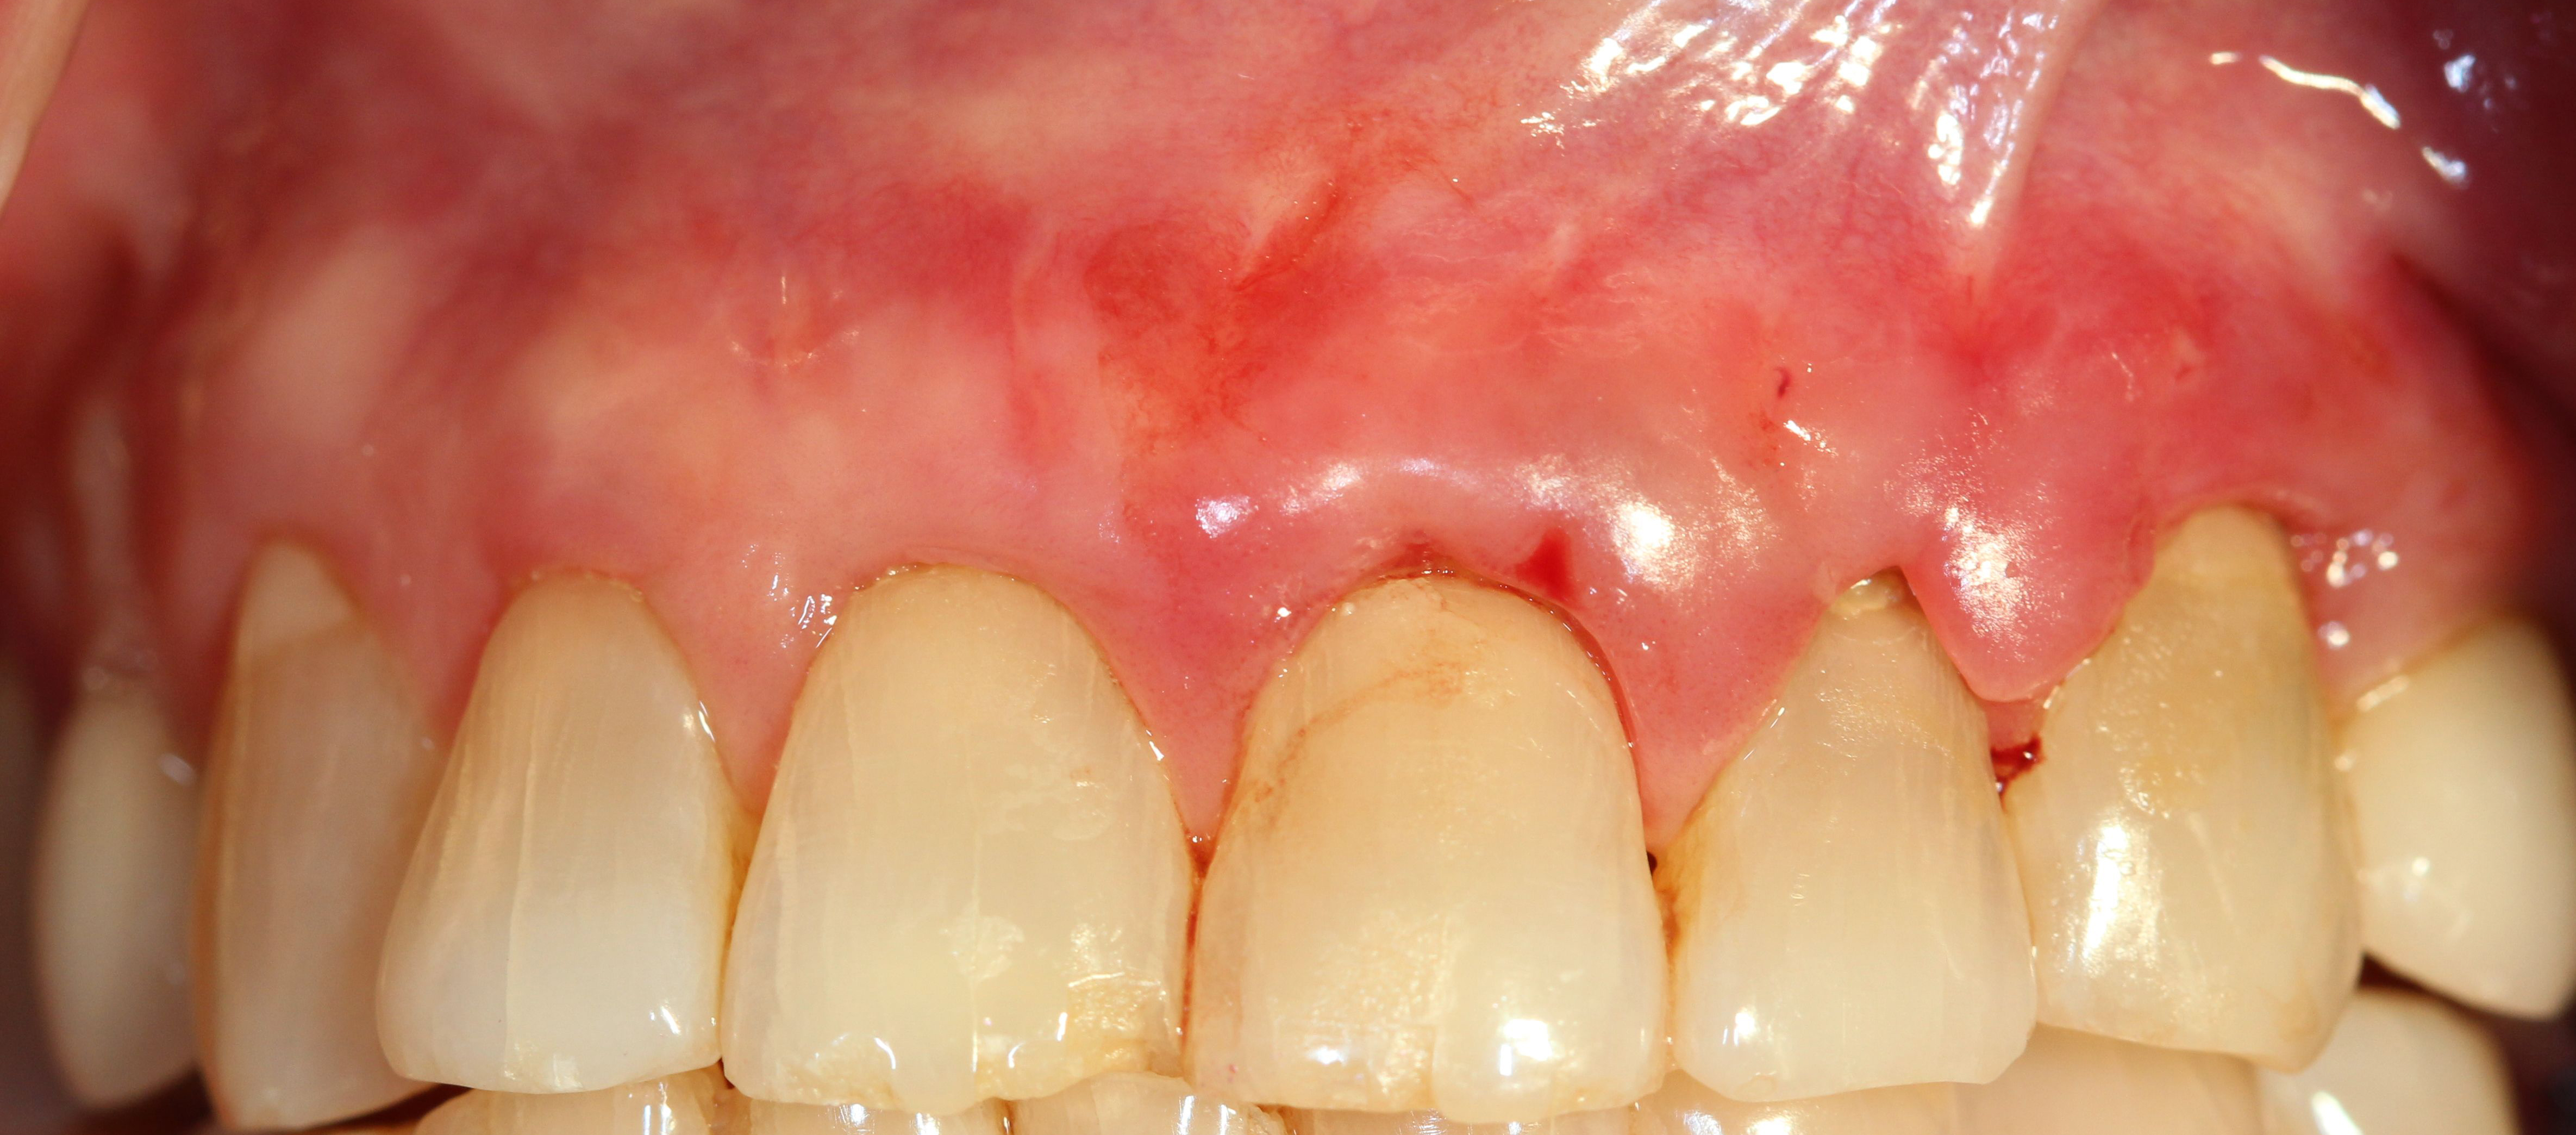 Upper anterior teeth after surgery